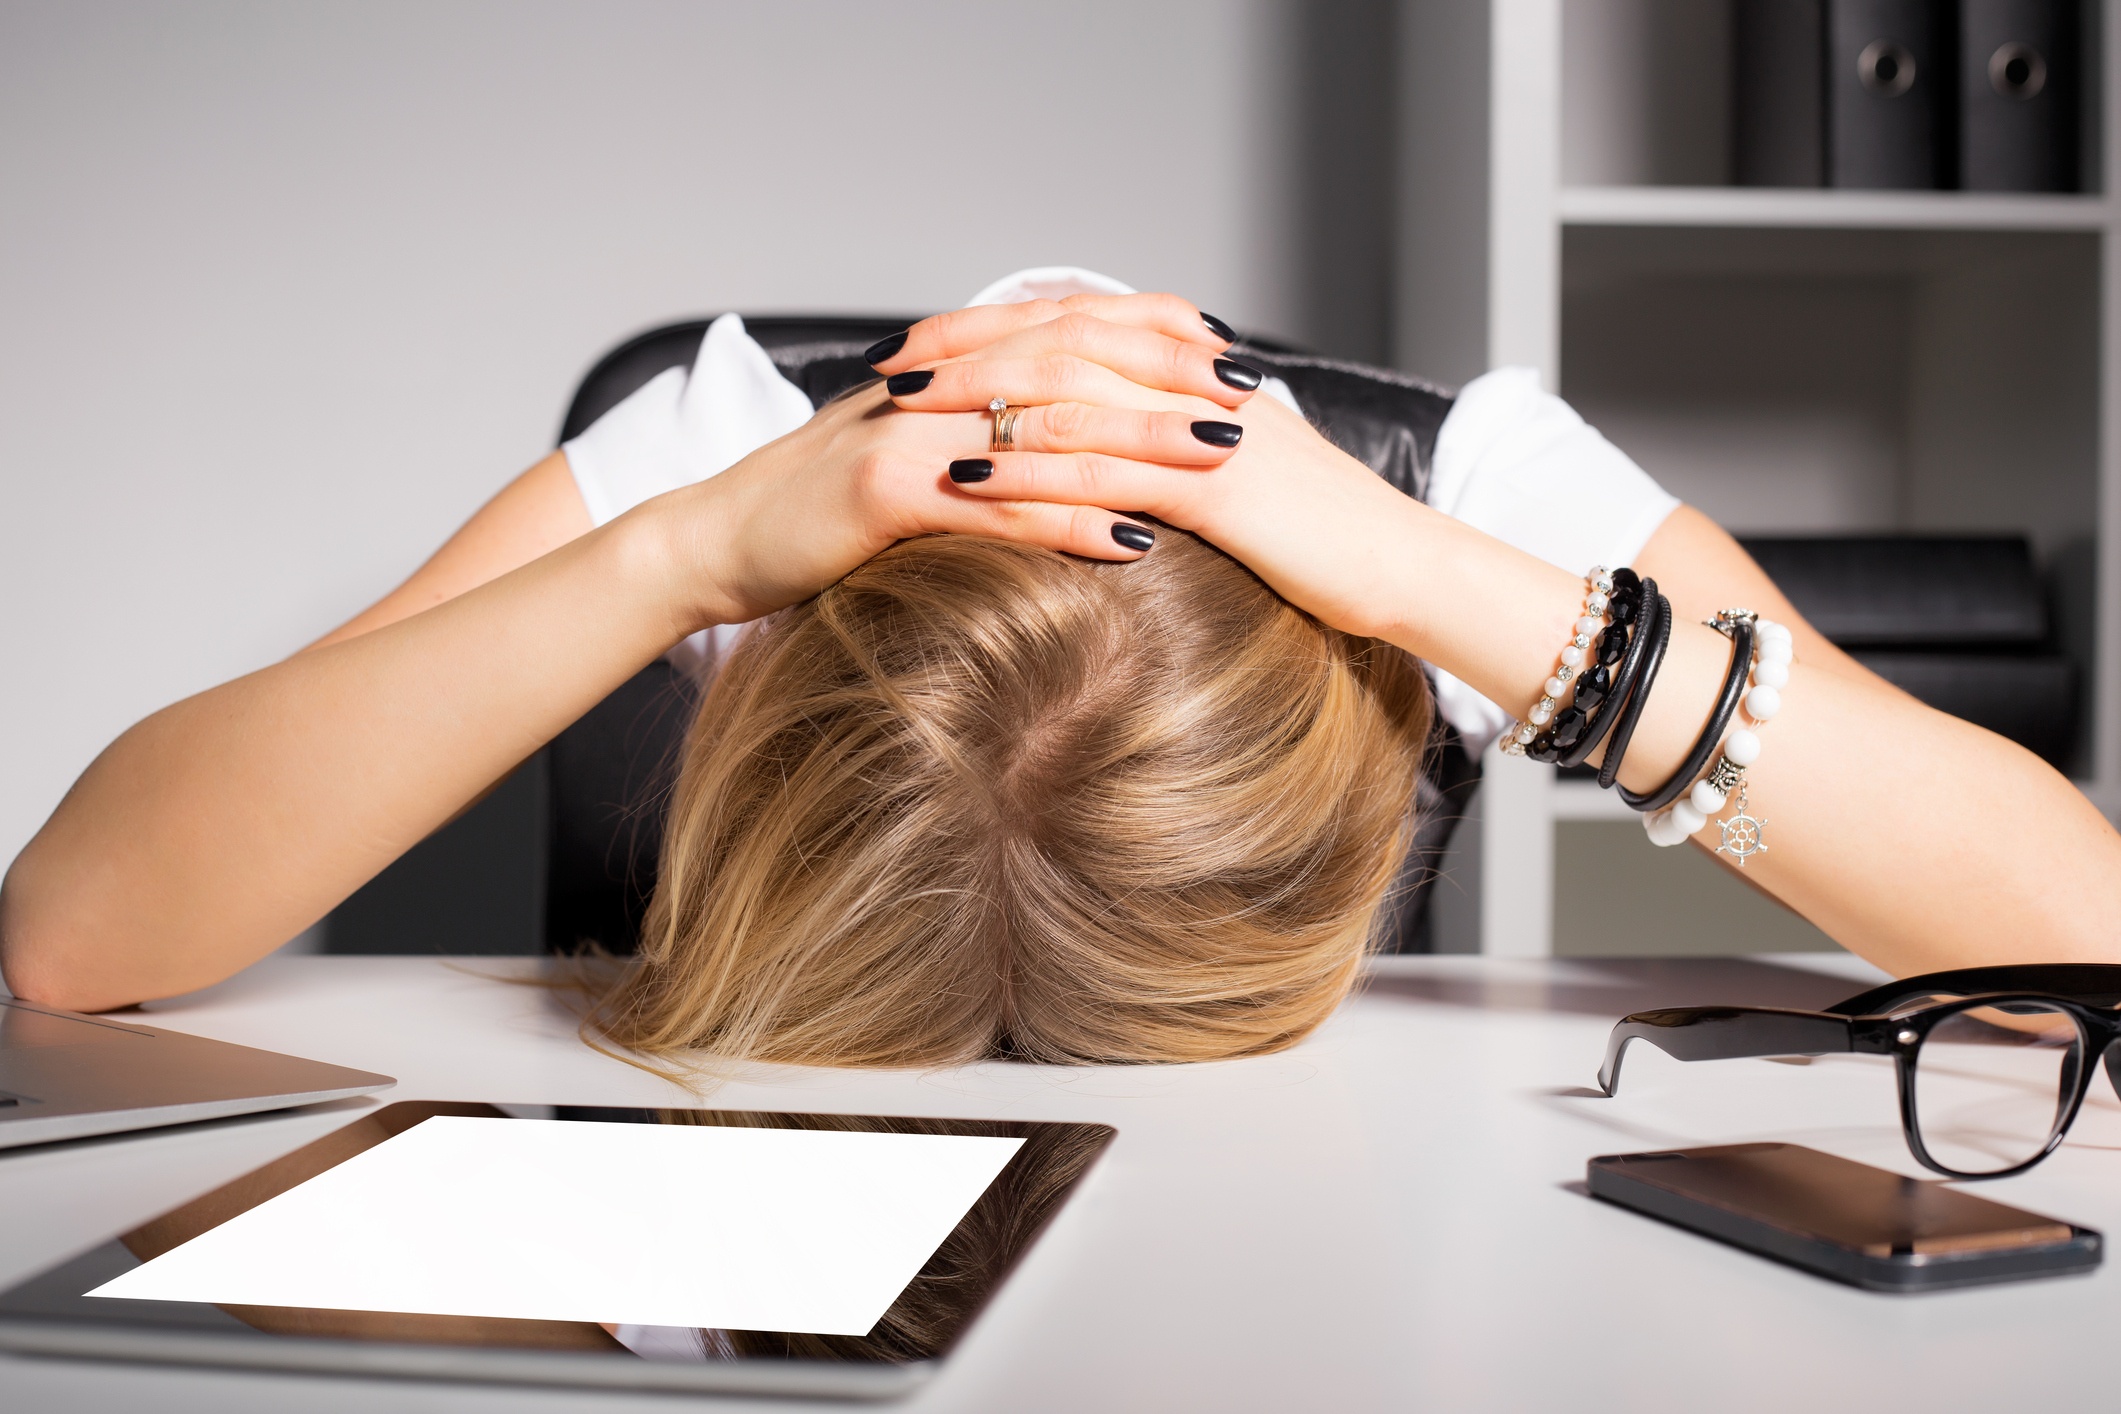 Tired and overwhelmed business woman resting her head on her desk